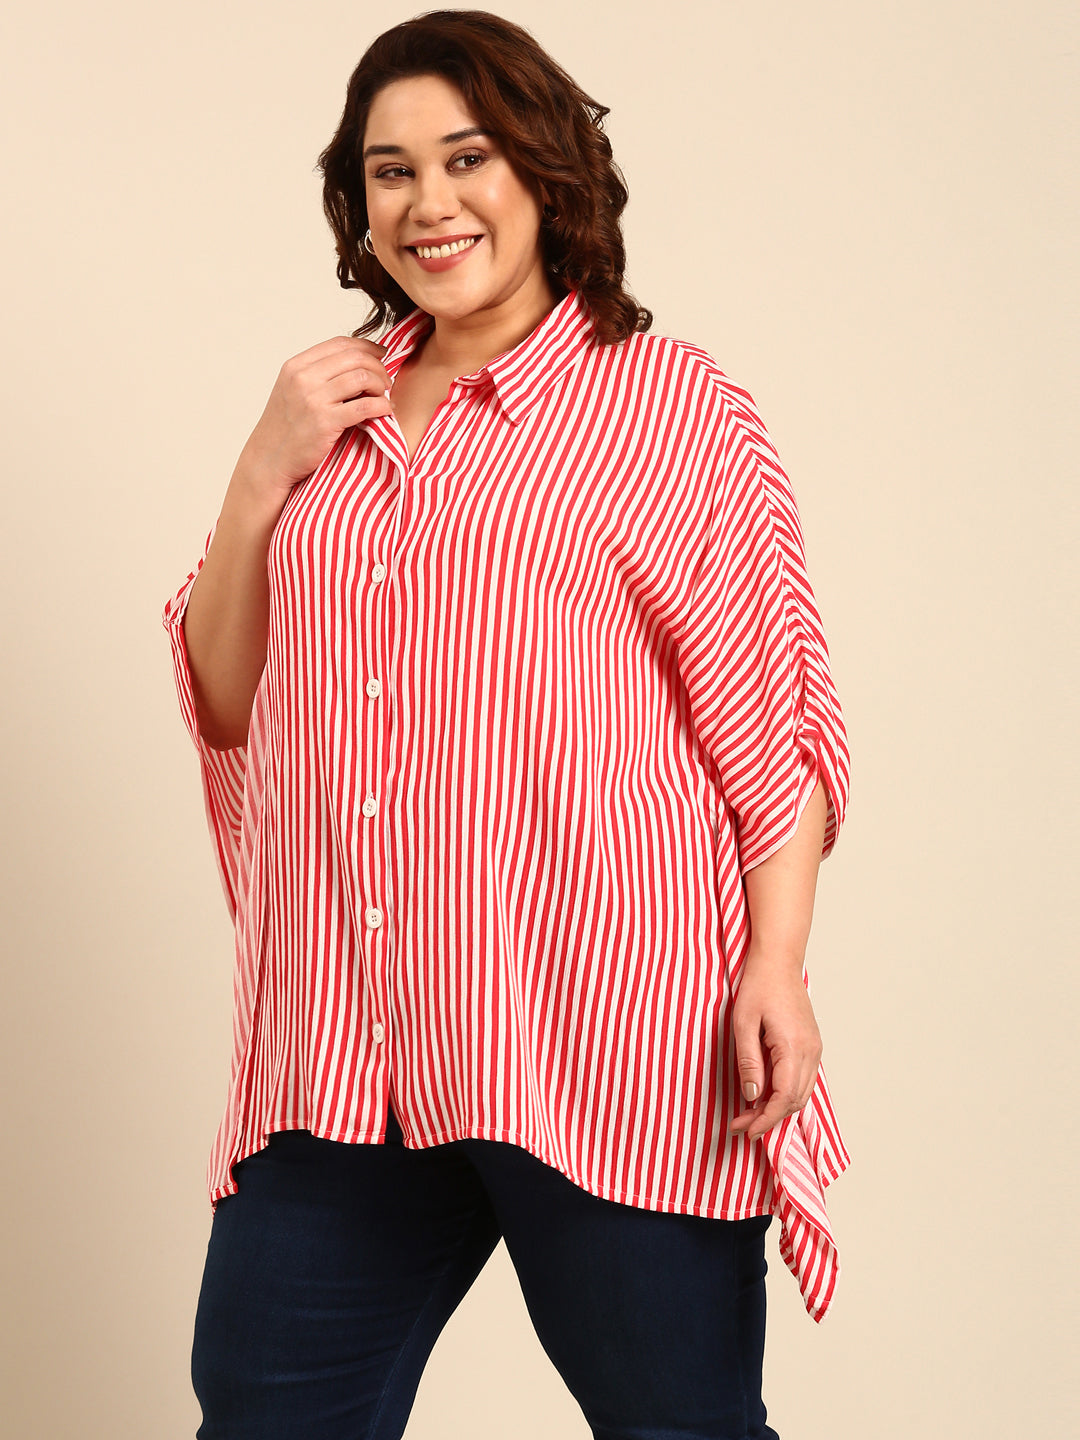 RED AND WHITE STRIPED SHIRT